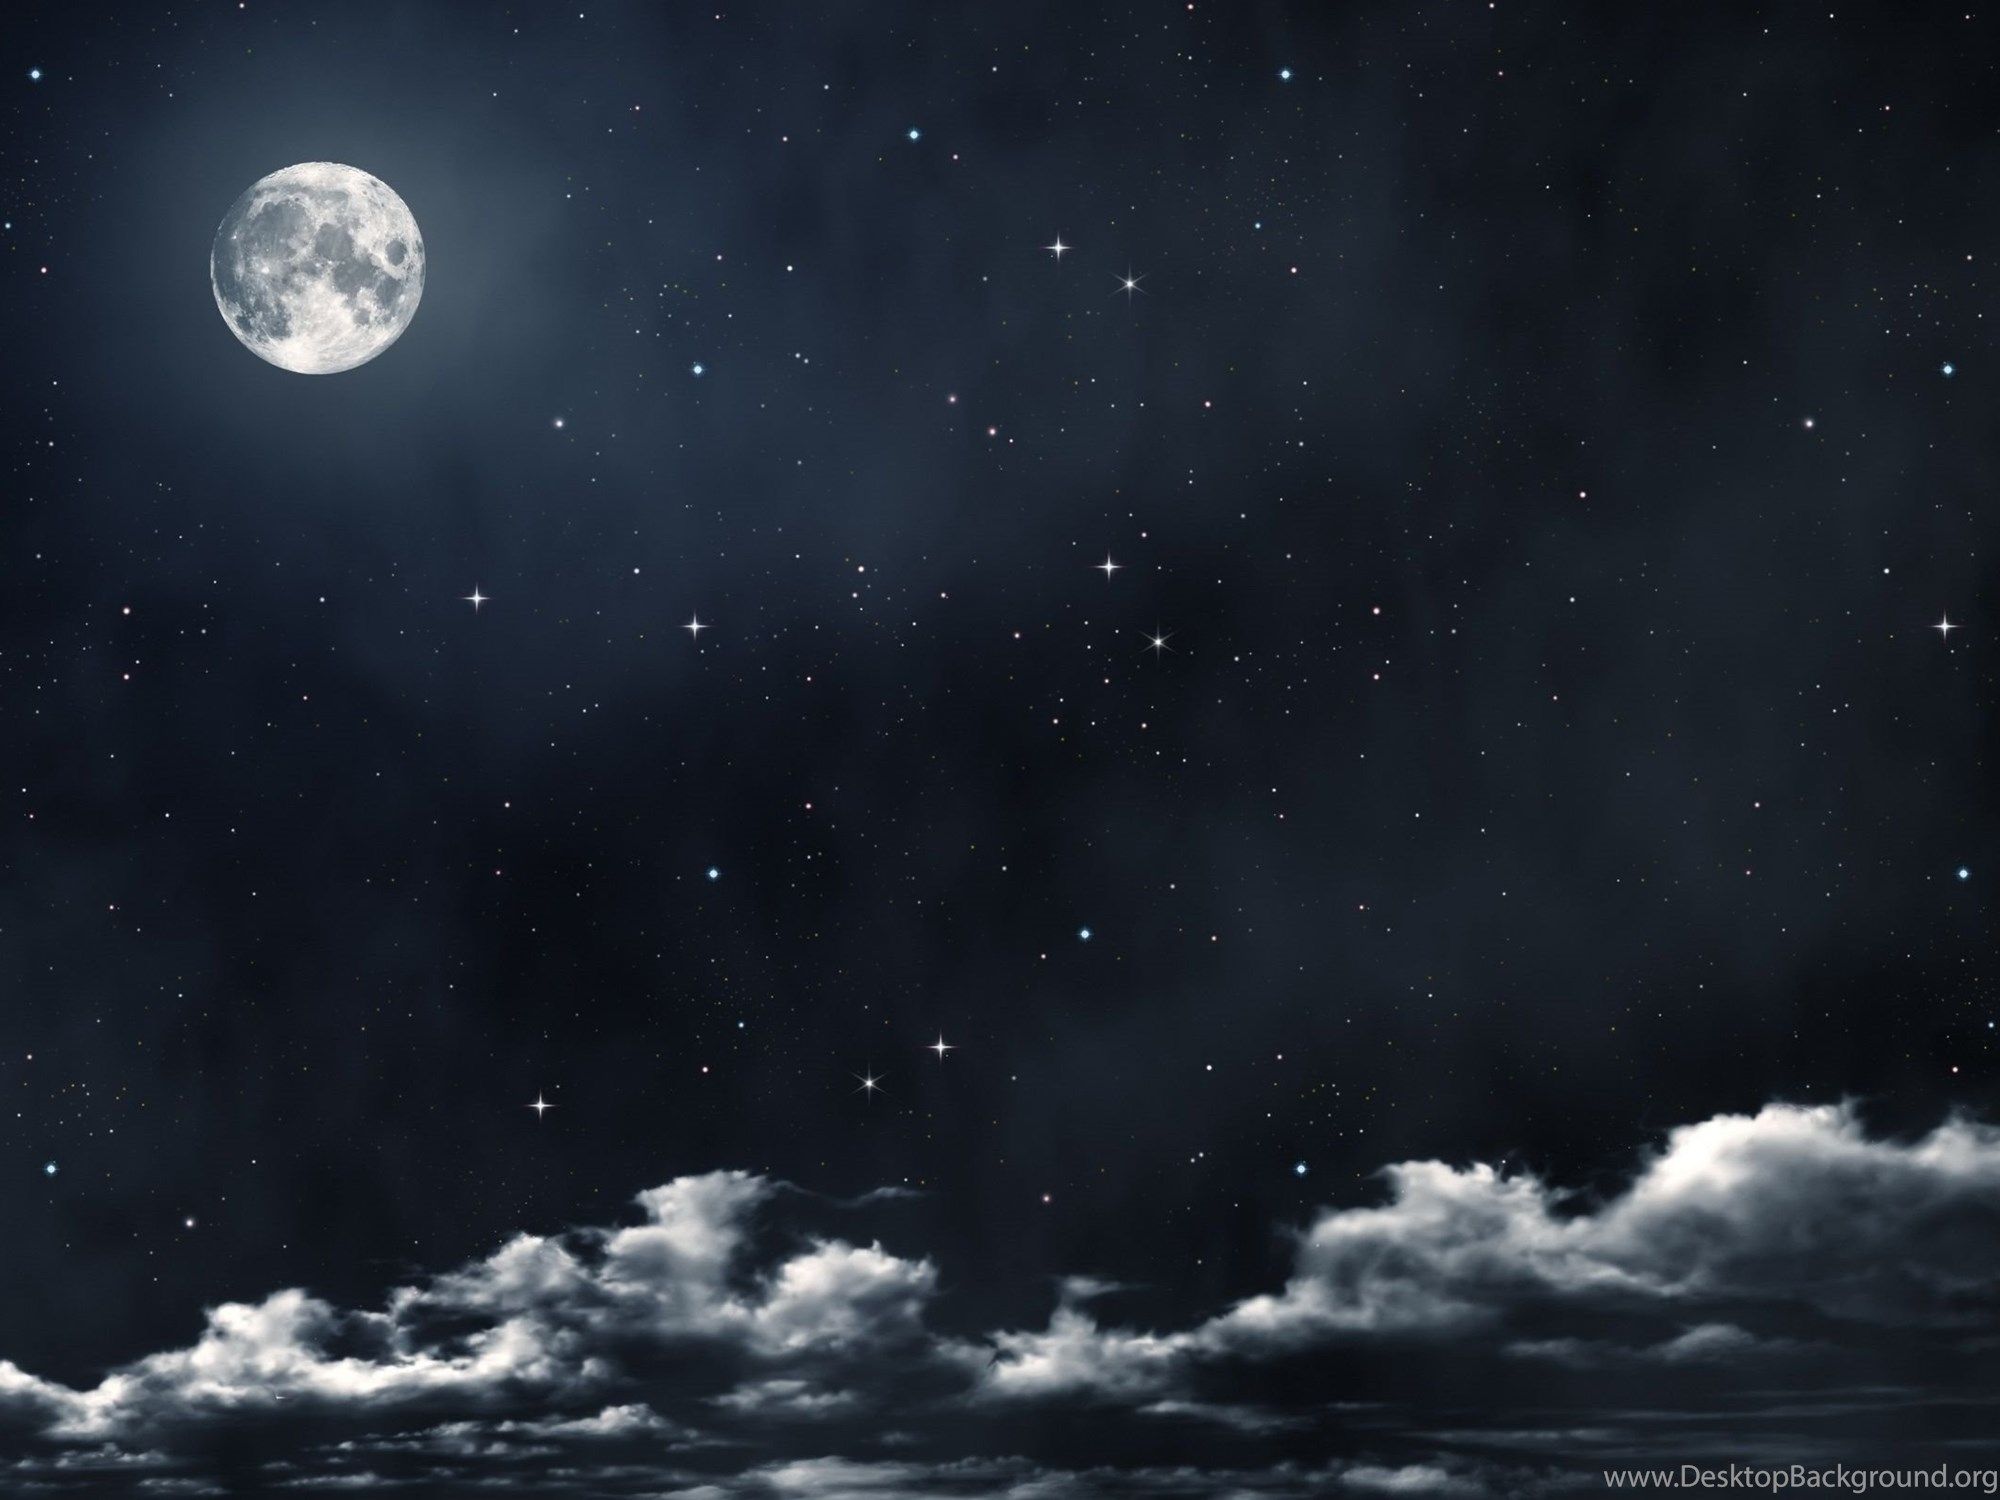 Good Night Picture With Beautiful Full Moon HD Wallpaper Desktop Background